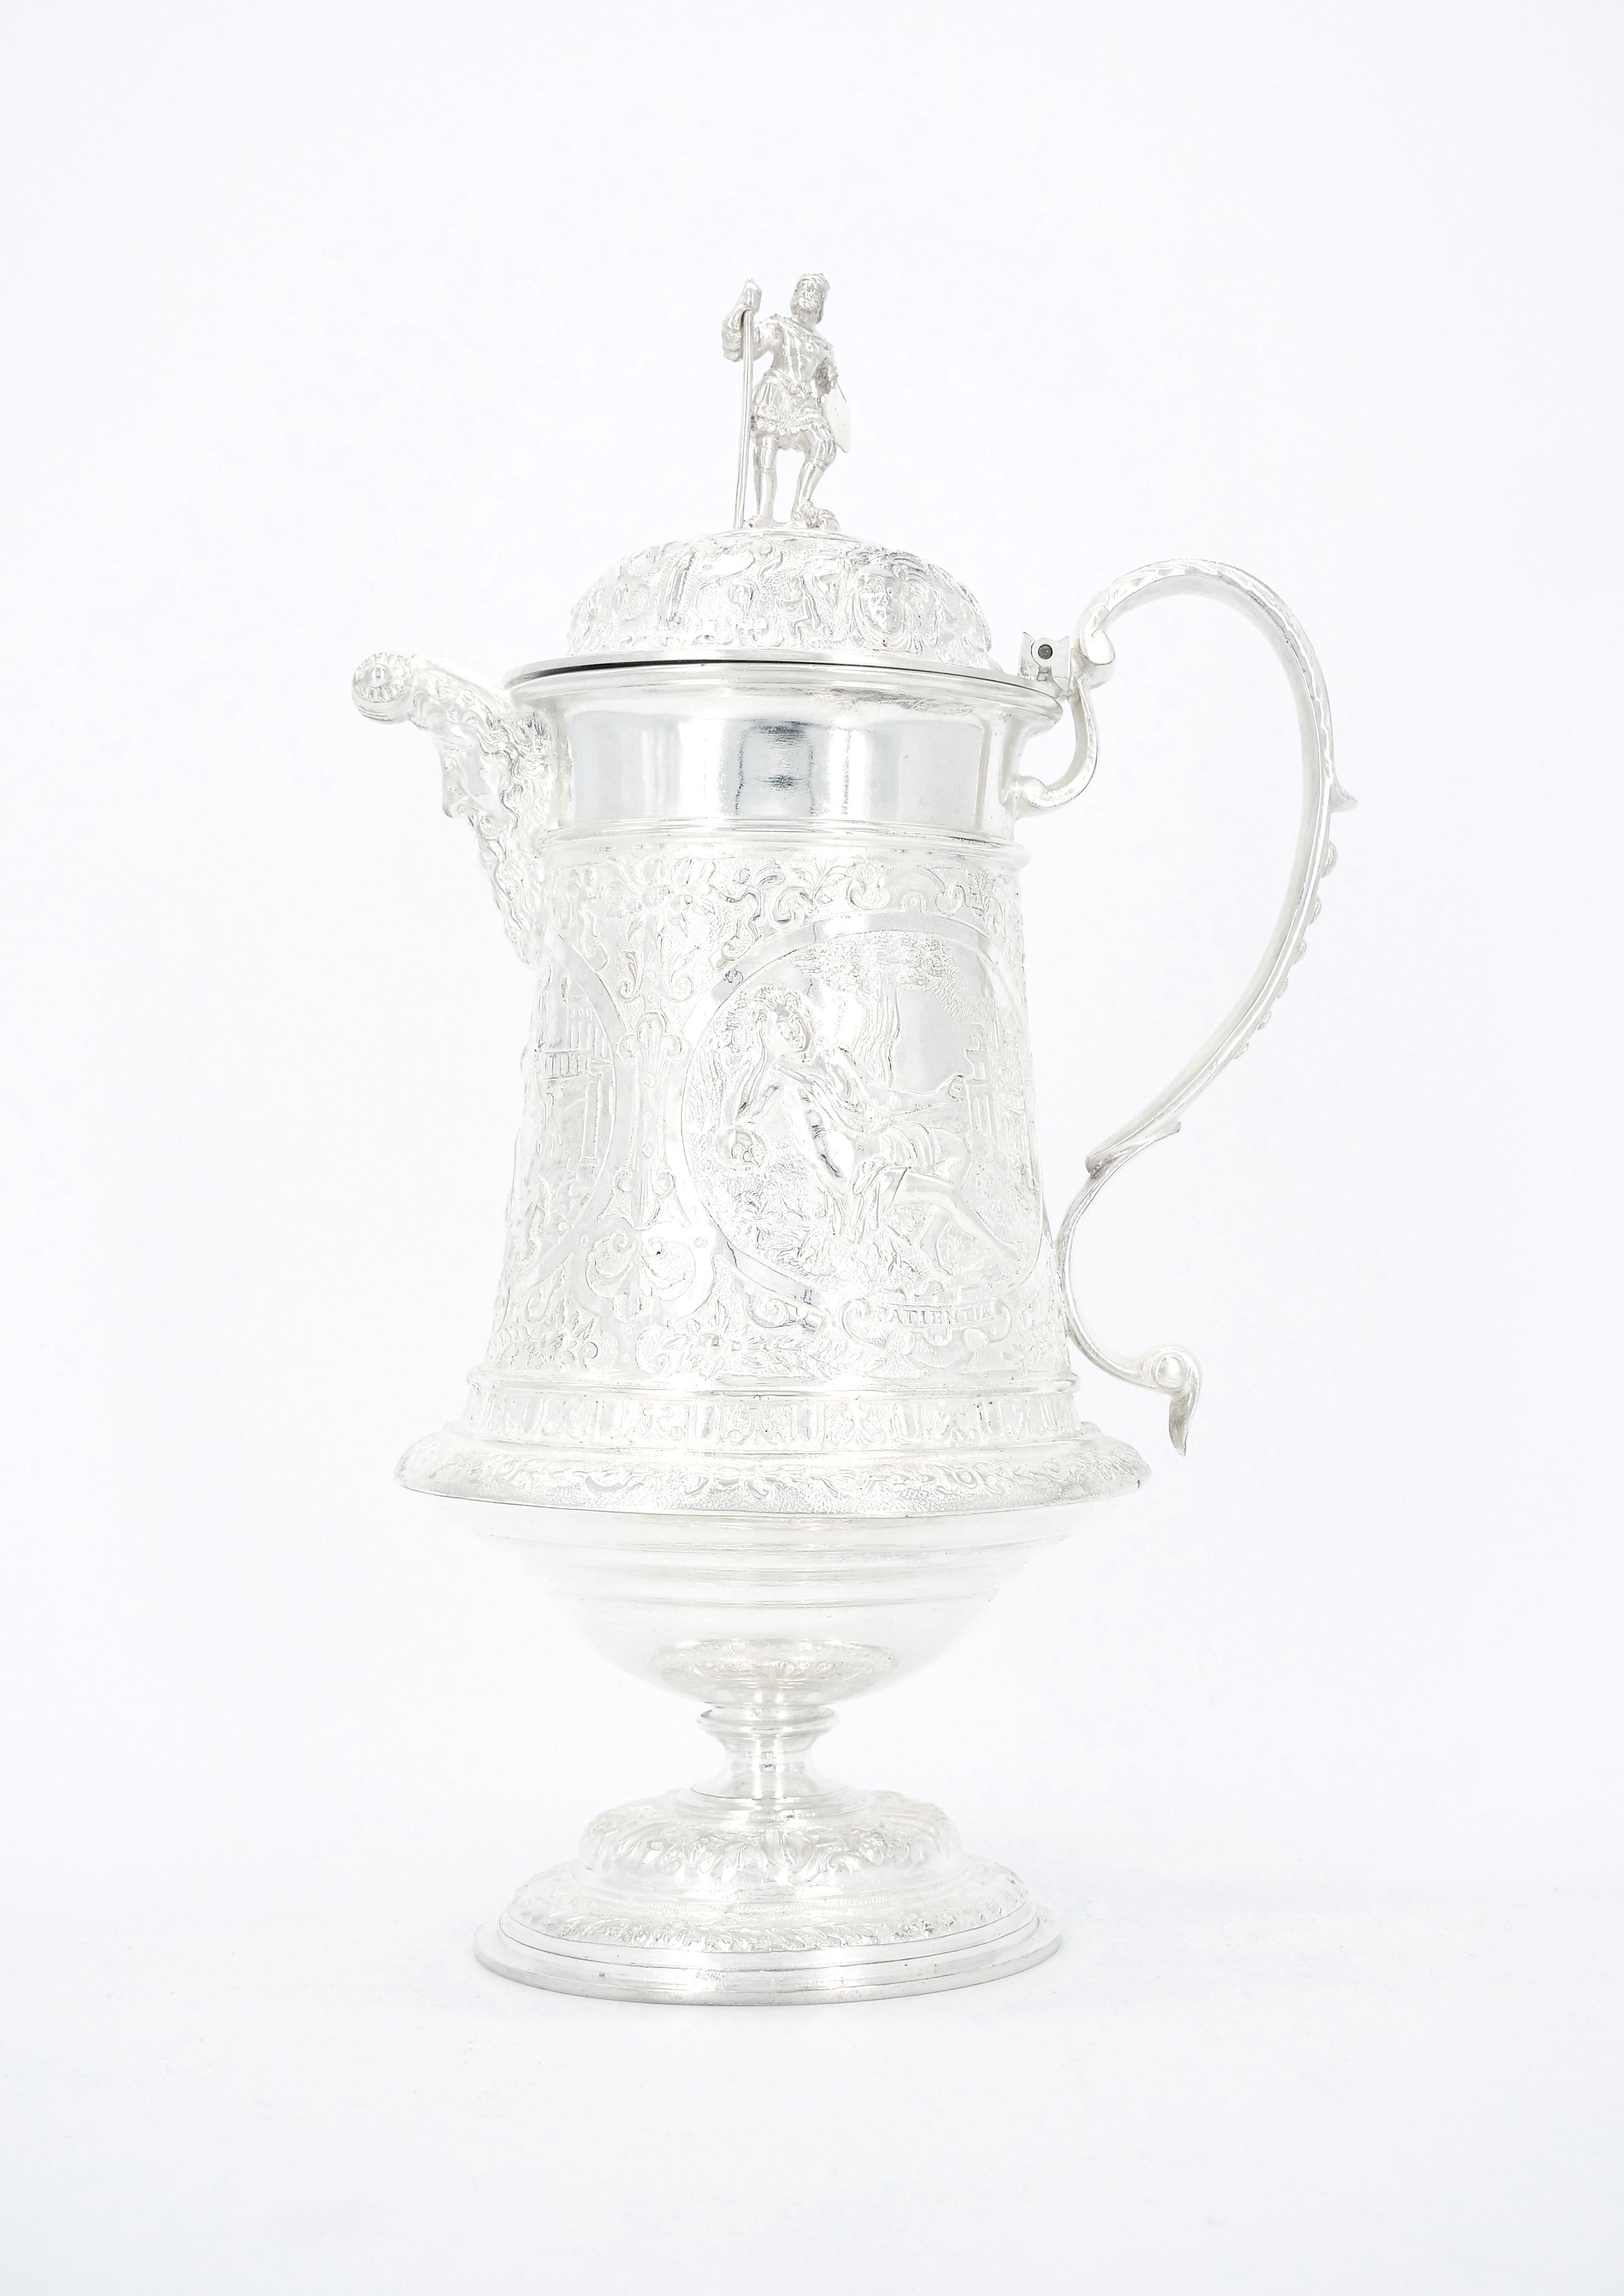 19th Century Old English Silver Plate Barware / Tableware Serving Jug For Sale